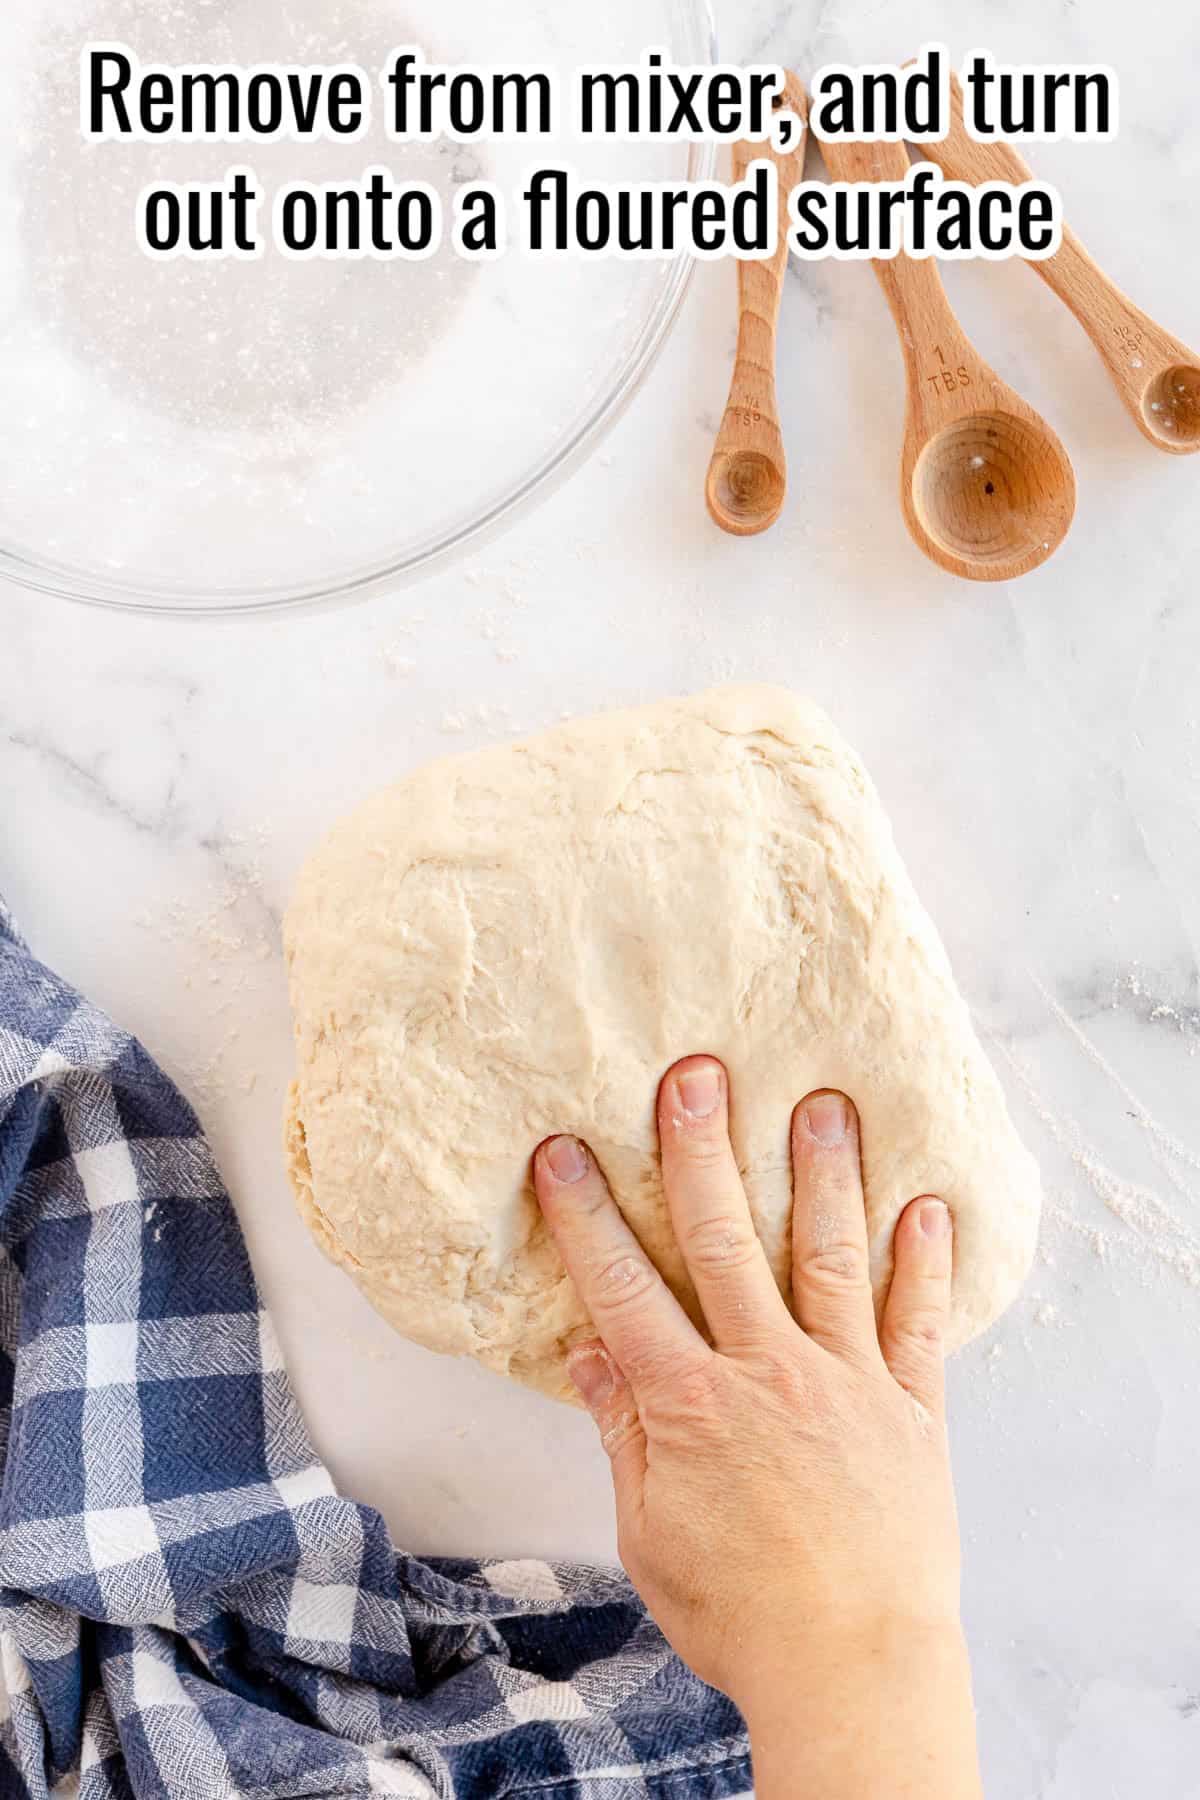 A hand is placing dough for sandwich bread onto a floured surface next to wooden measuring spoons and a checked cloth. Text at the top instructs to remove from the mixer and turn out onto the floured surface.